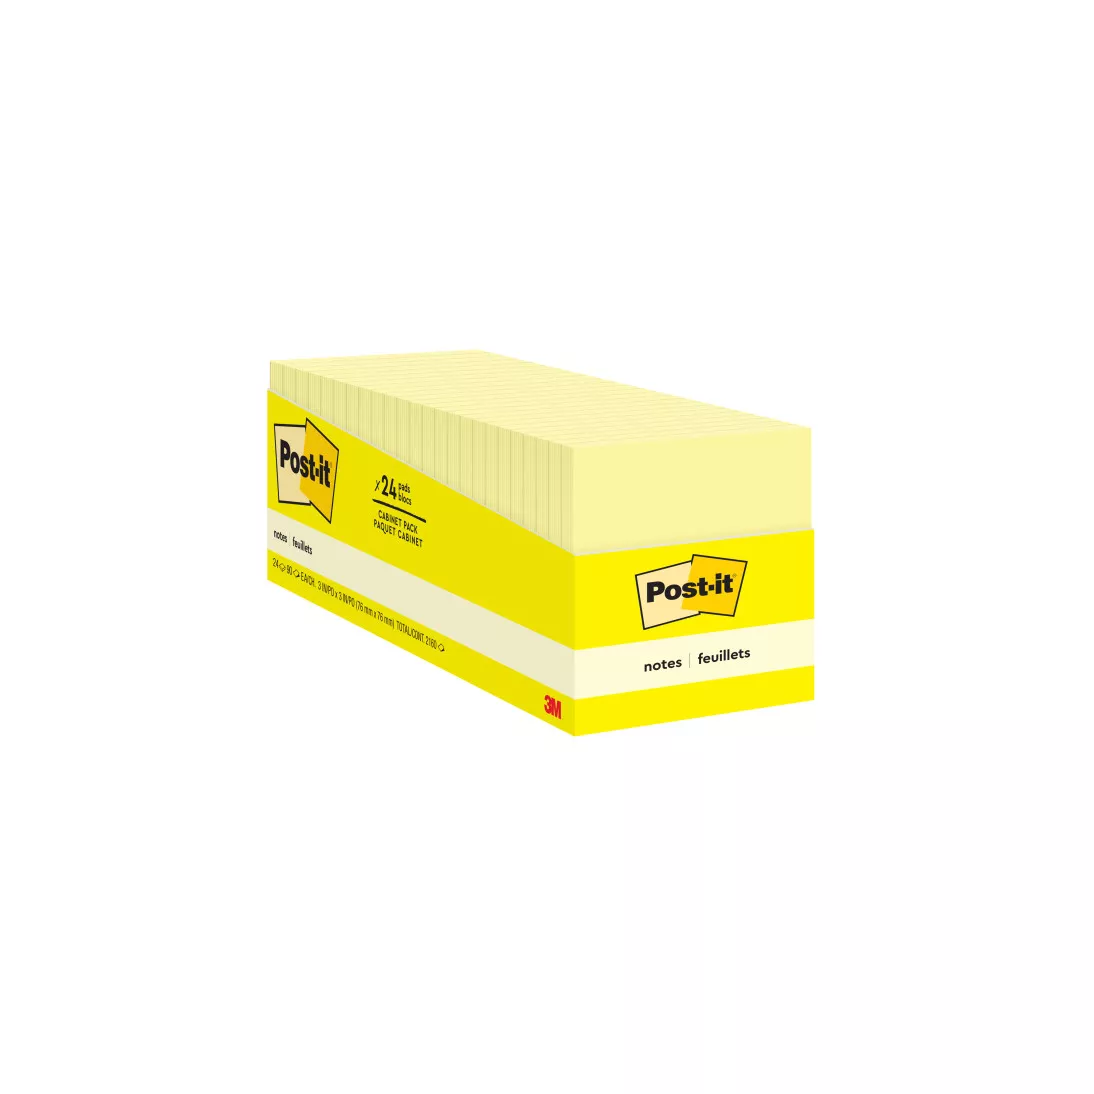 Post-it® Notes 654-24CP, 3 in x 3 in (76 mm x 76 mm), Canary Yellow